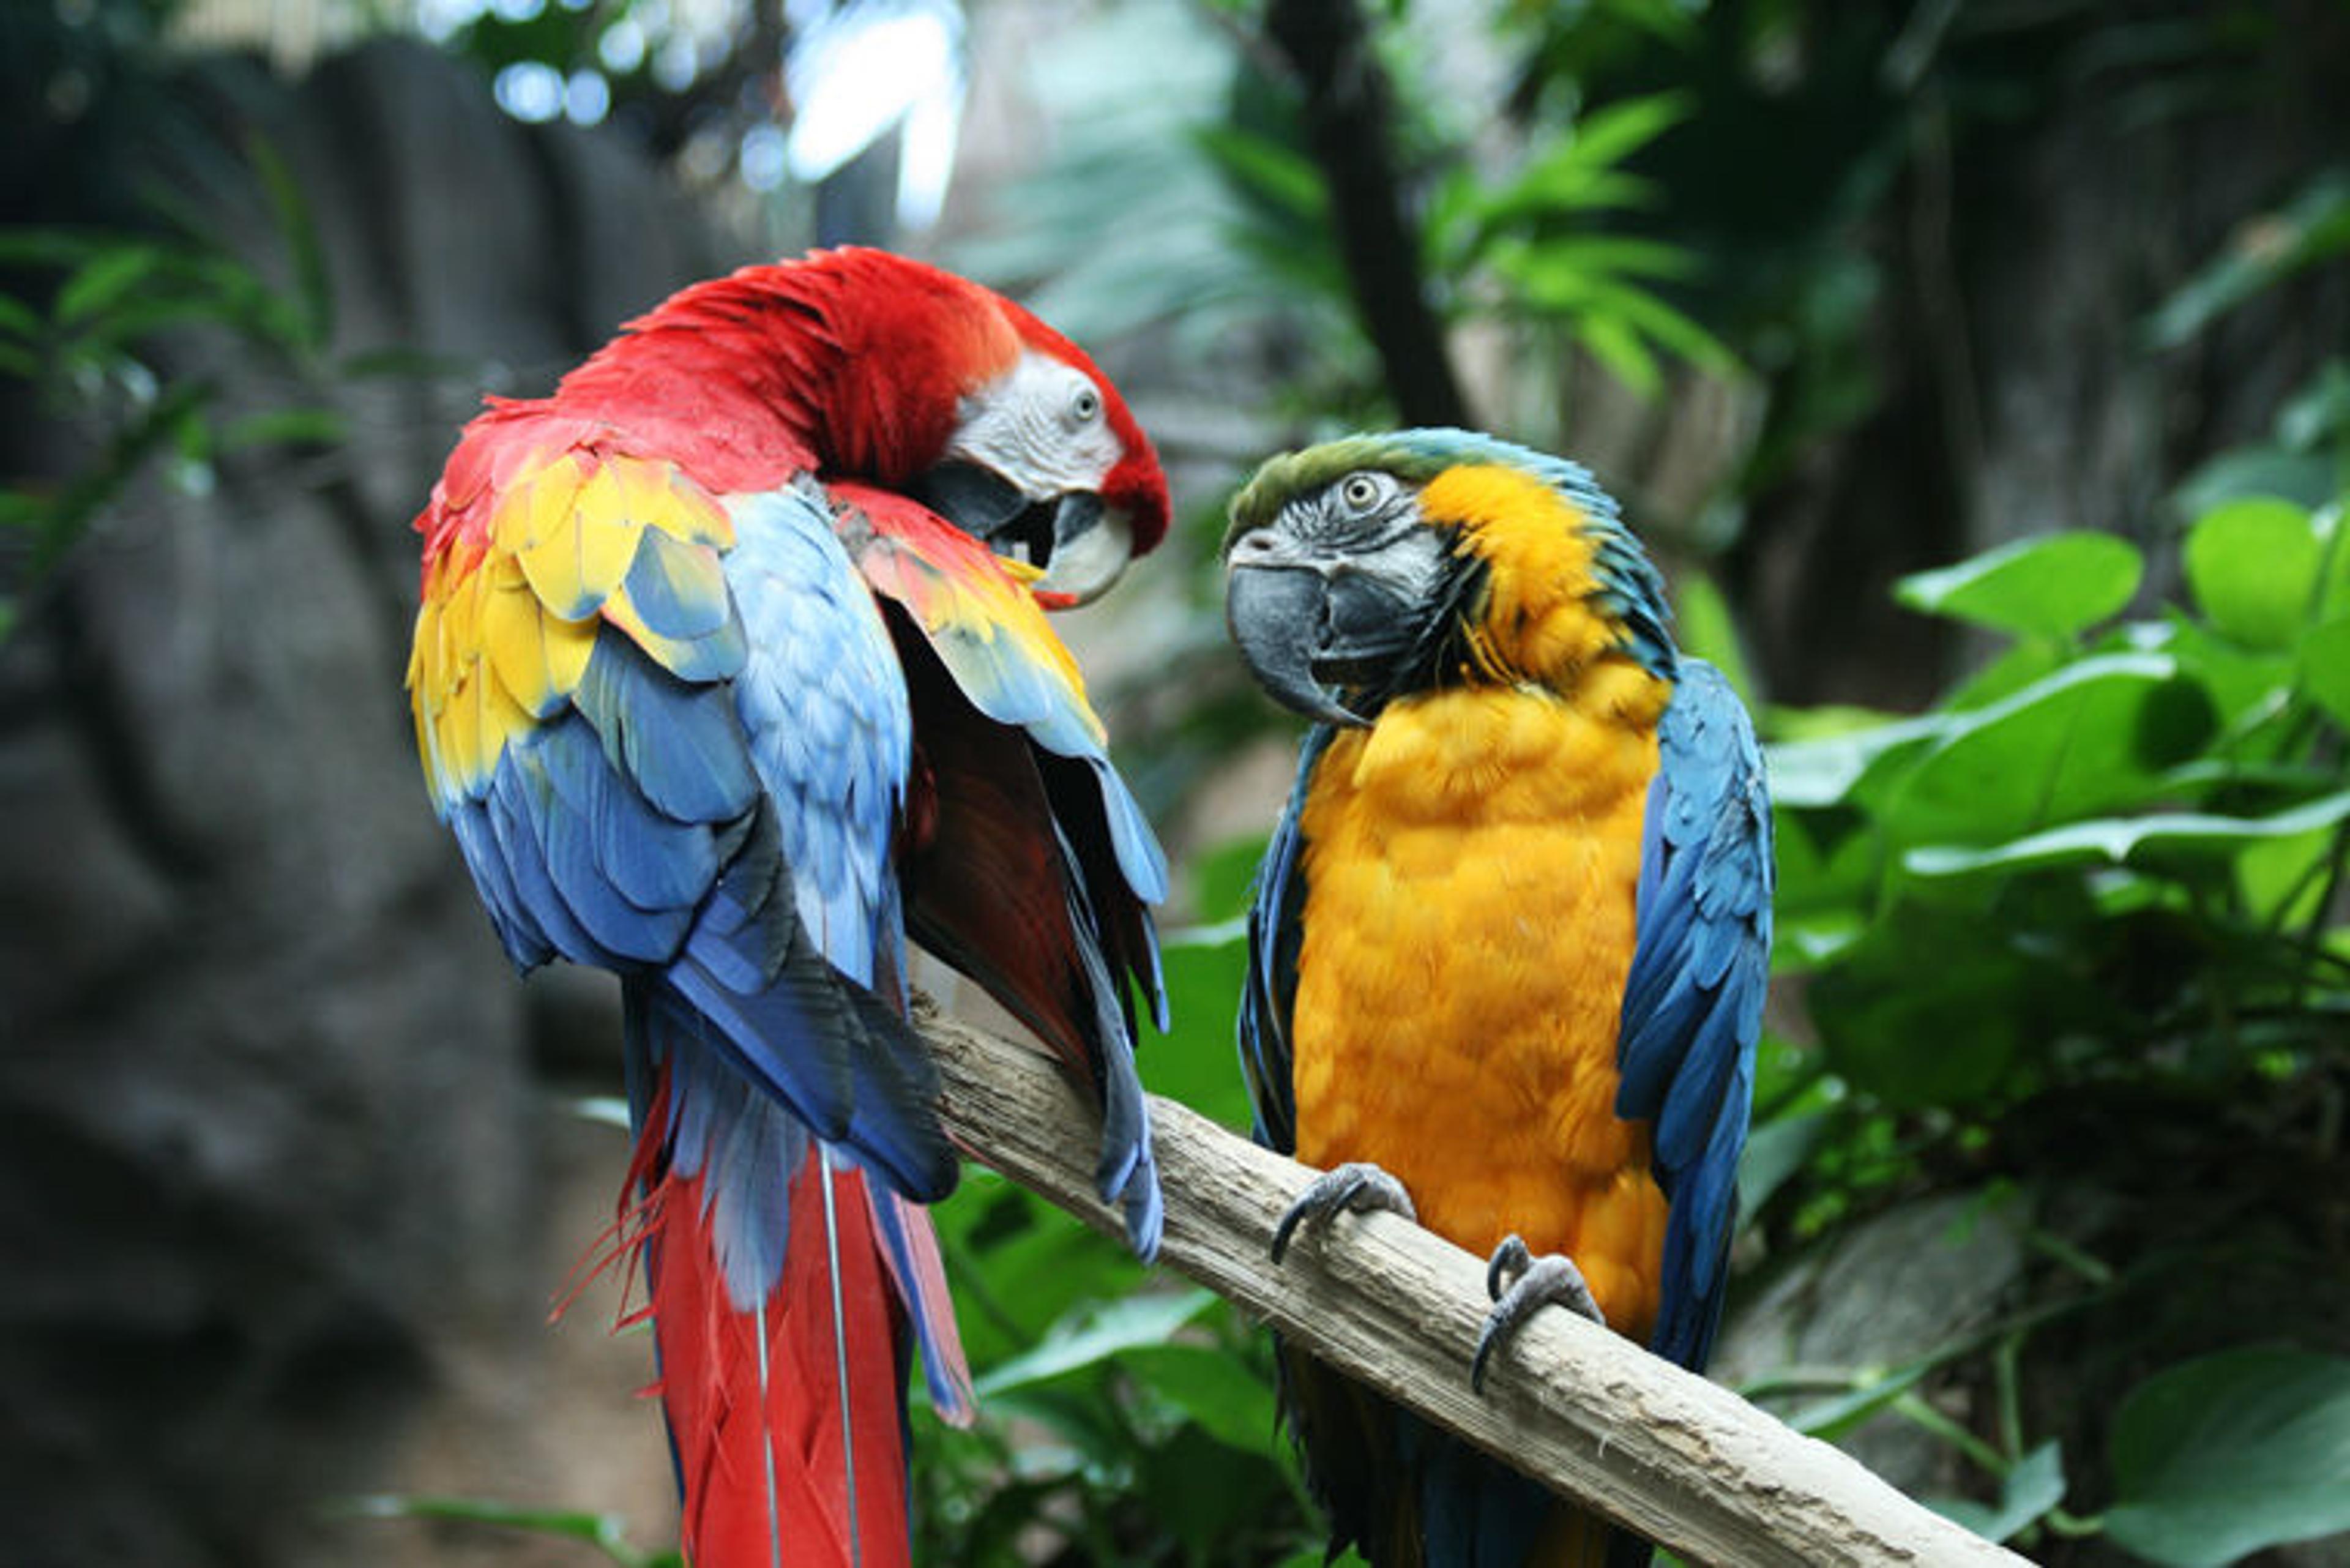 Scarlet macaw (left) and blue-and-yellow macaw (right) sit on a tree branch in a rainforest